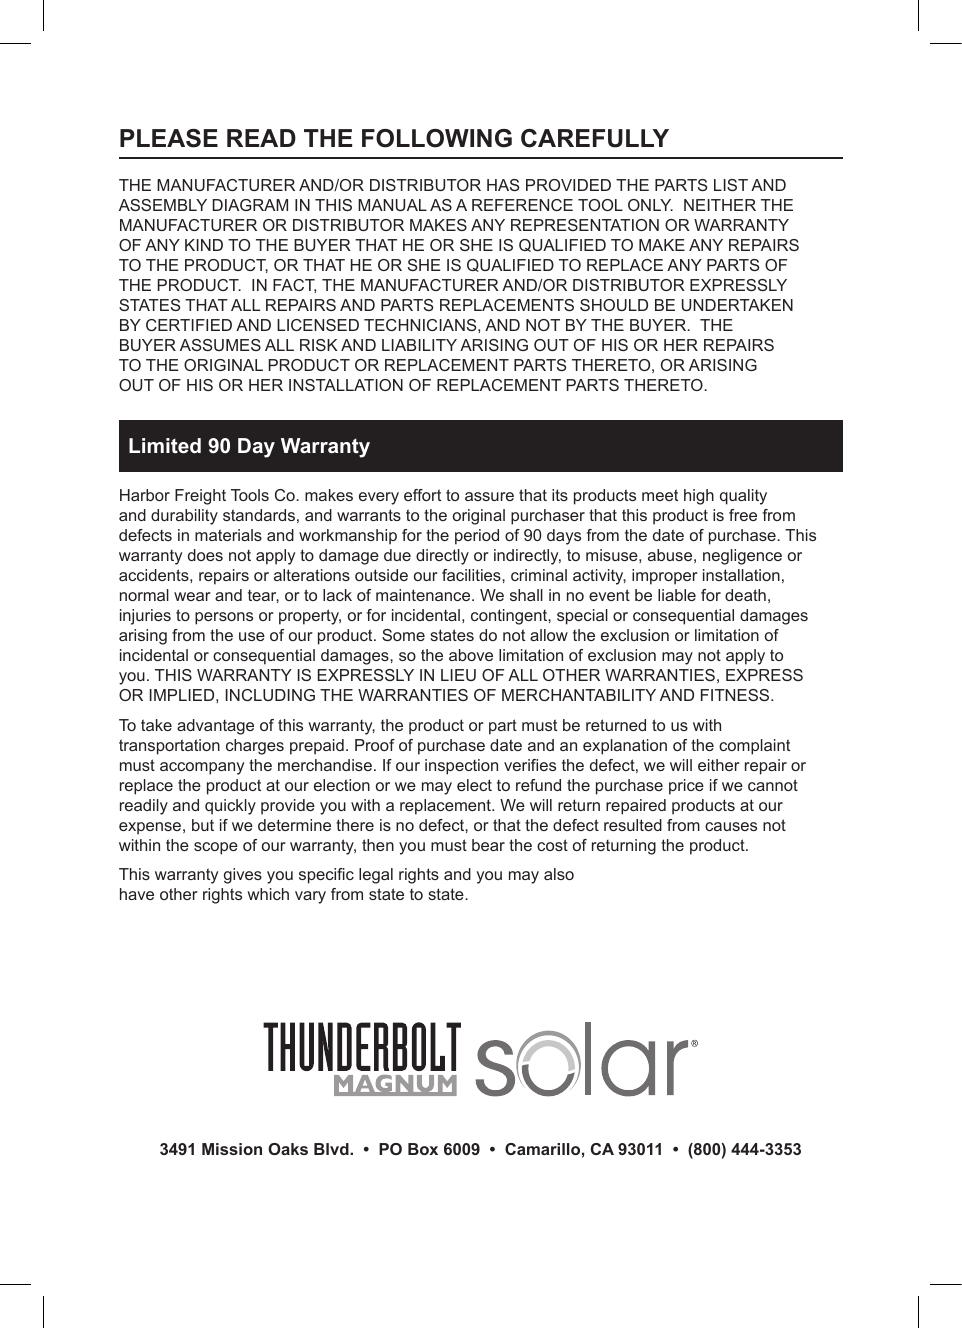 Page 8 of 8 - Harbor-Freight Harbor-Freight-5-Watt-Foldable-Solar-Panel-Charger-Product-Manual-  Harbor-freight-5-watt-foldable-solar-panel-charger-product-manual